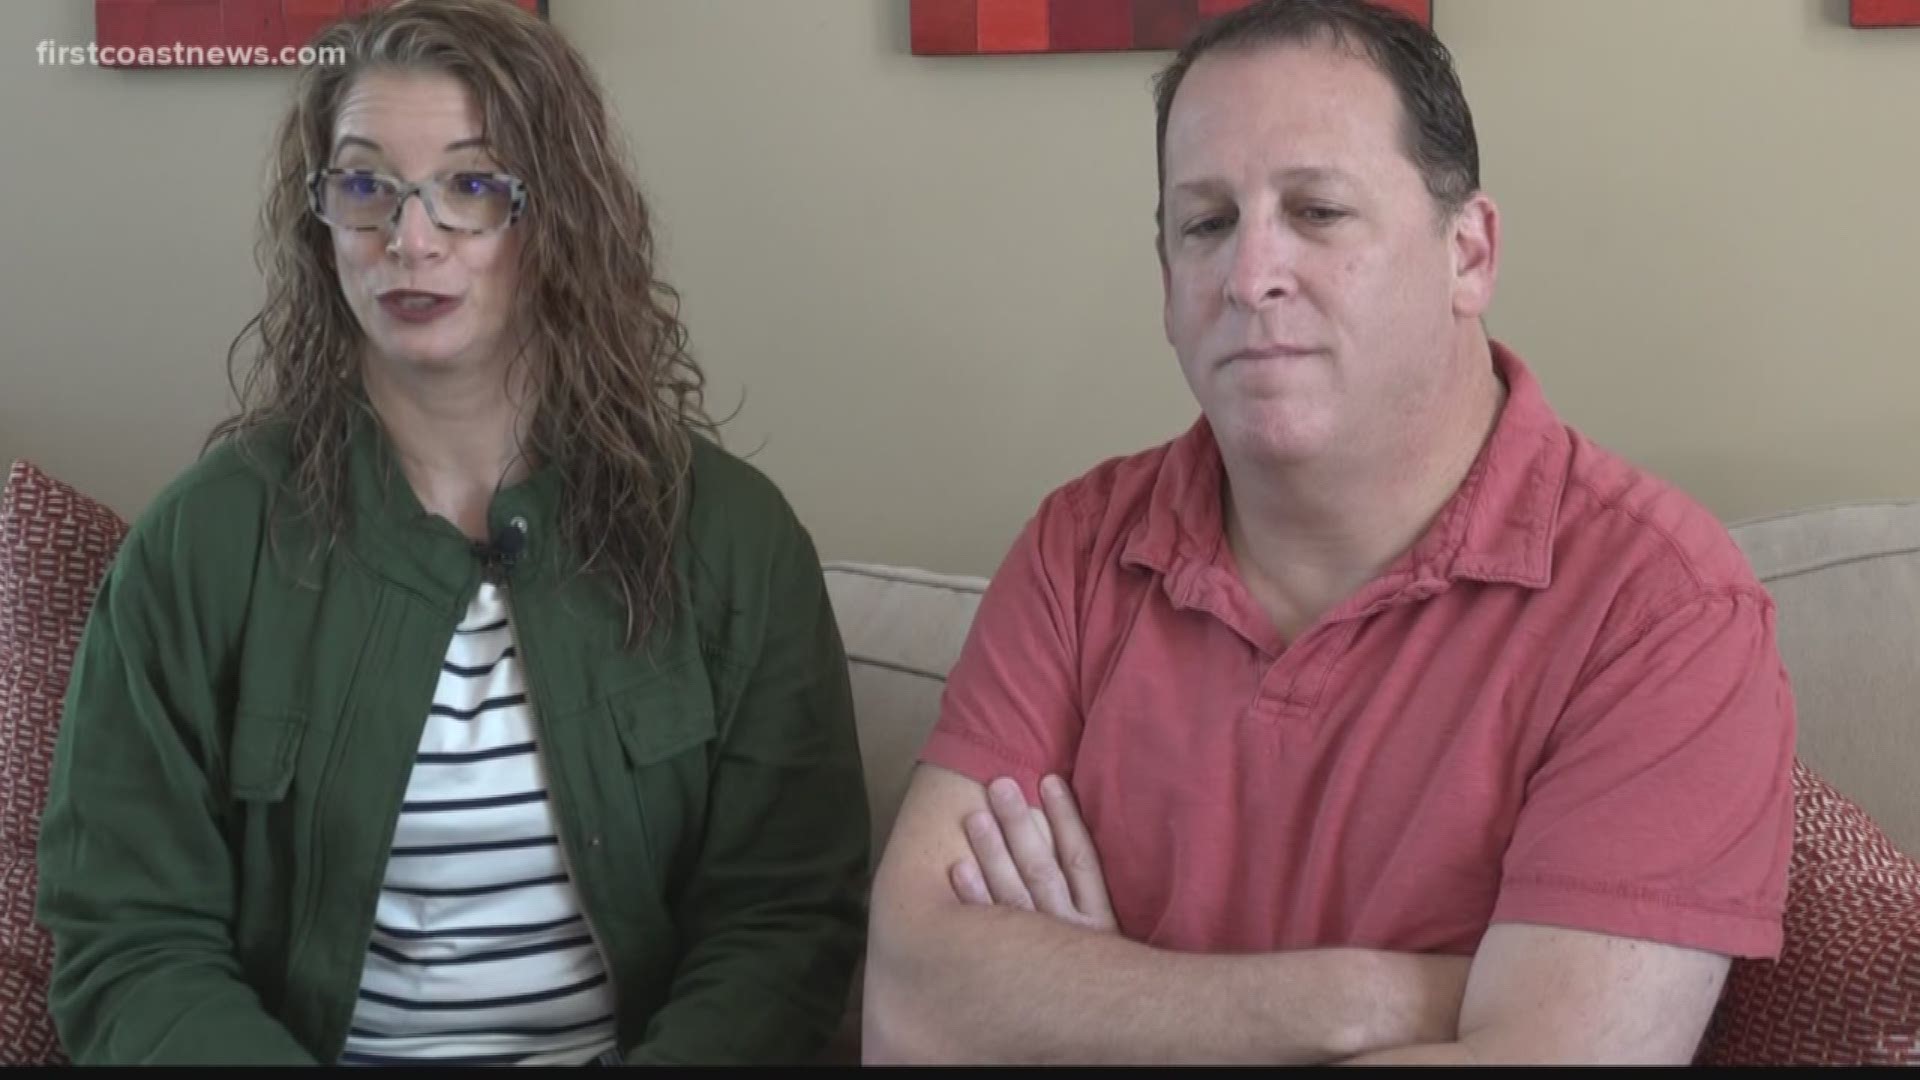 A Fruit Cove couple says things went awry when a JEA employee randomly showed up at their home on a Saturday to upgrade their electric meter.